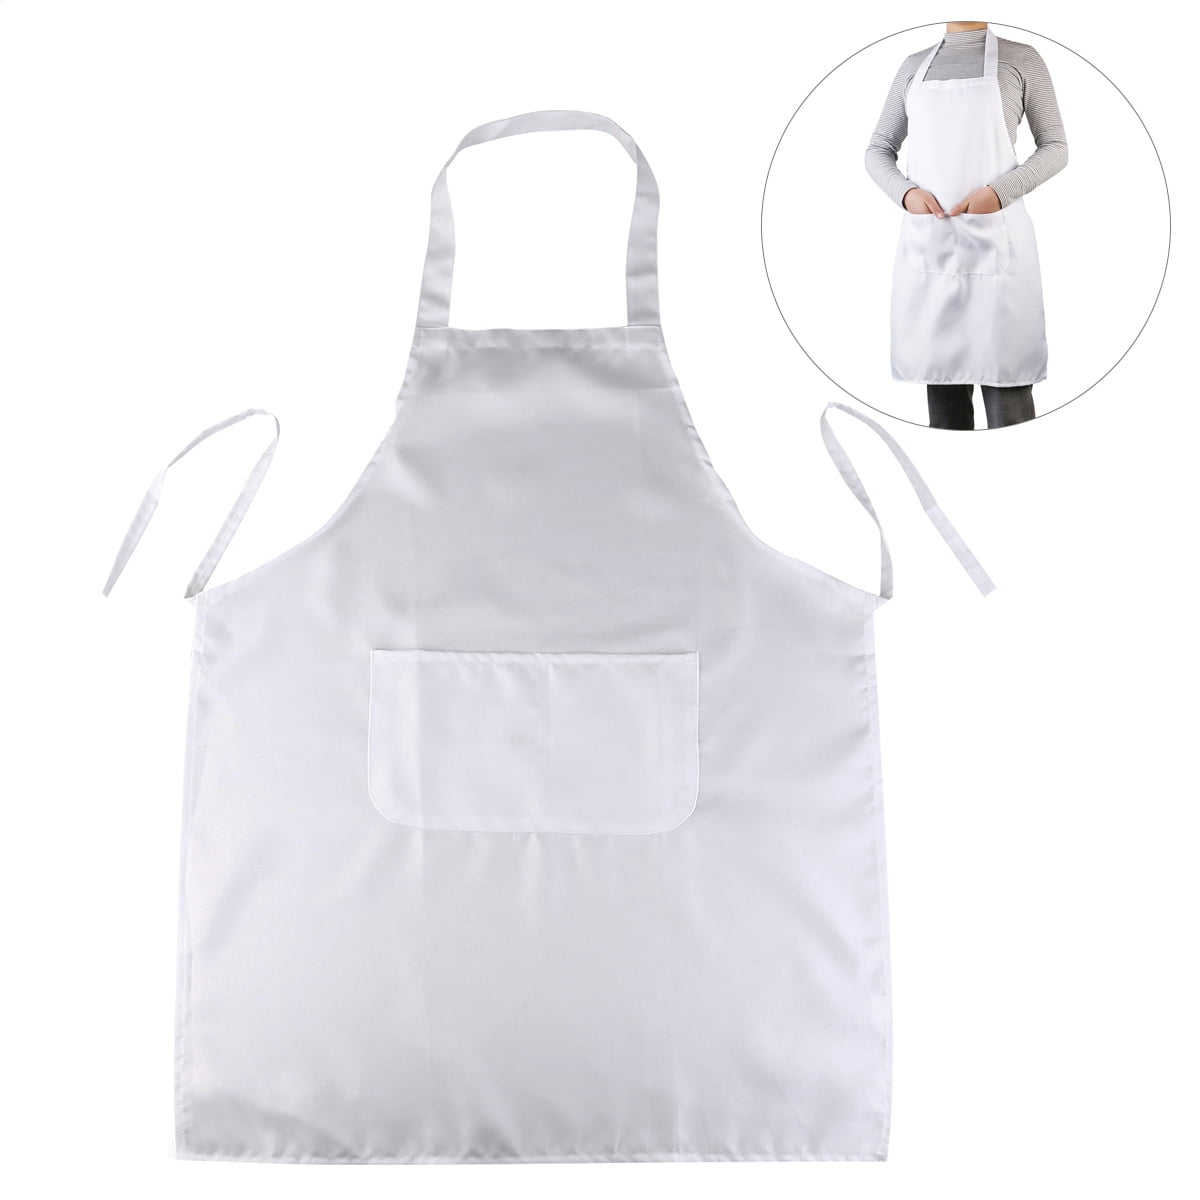 Tinksky Halter-neck Style Sleeveless Kitchen Cooking Apron with Pocket  (White)